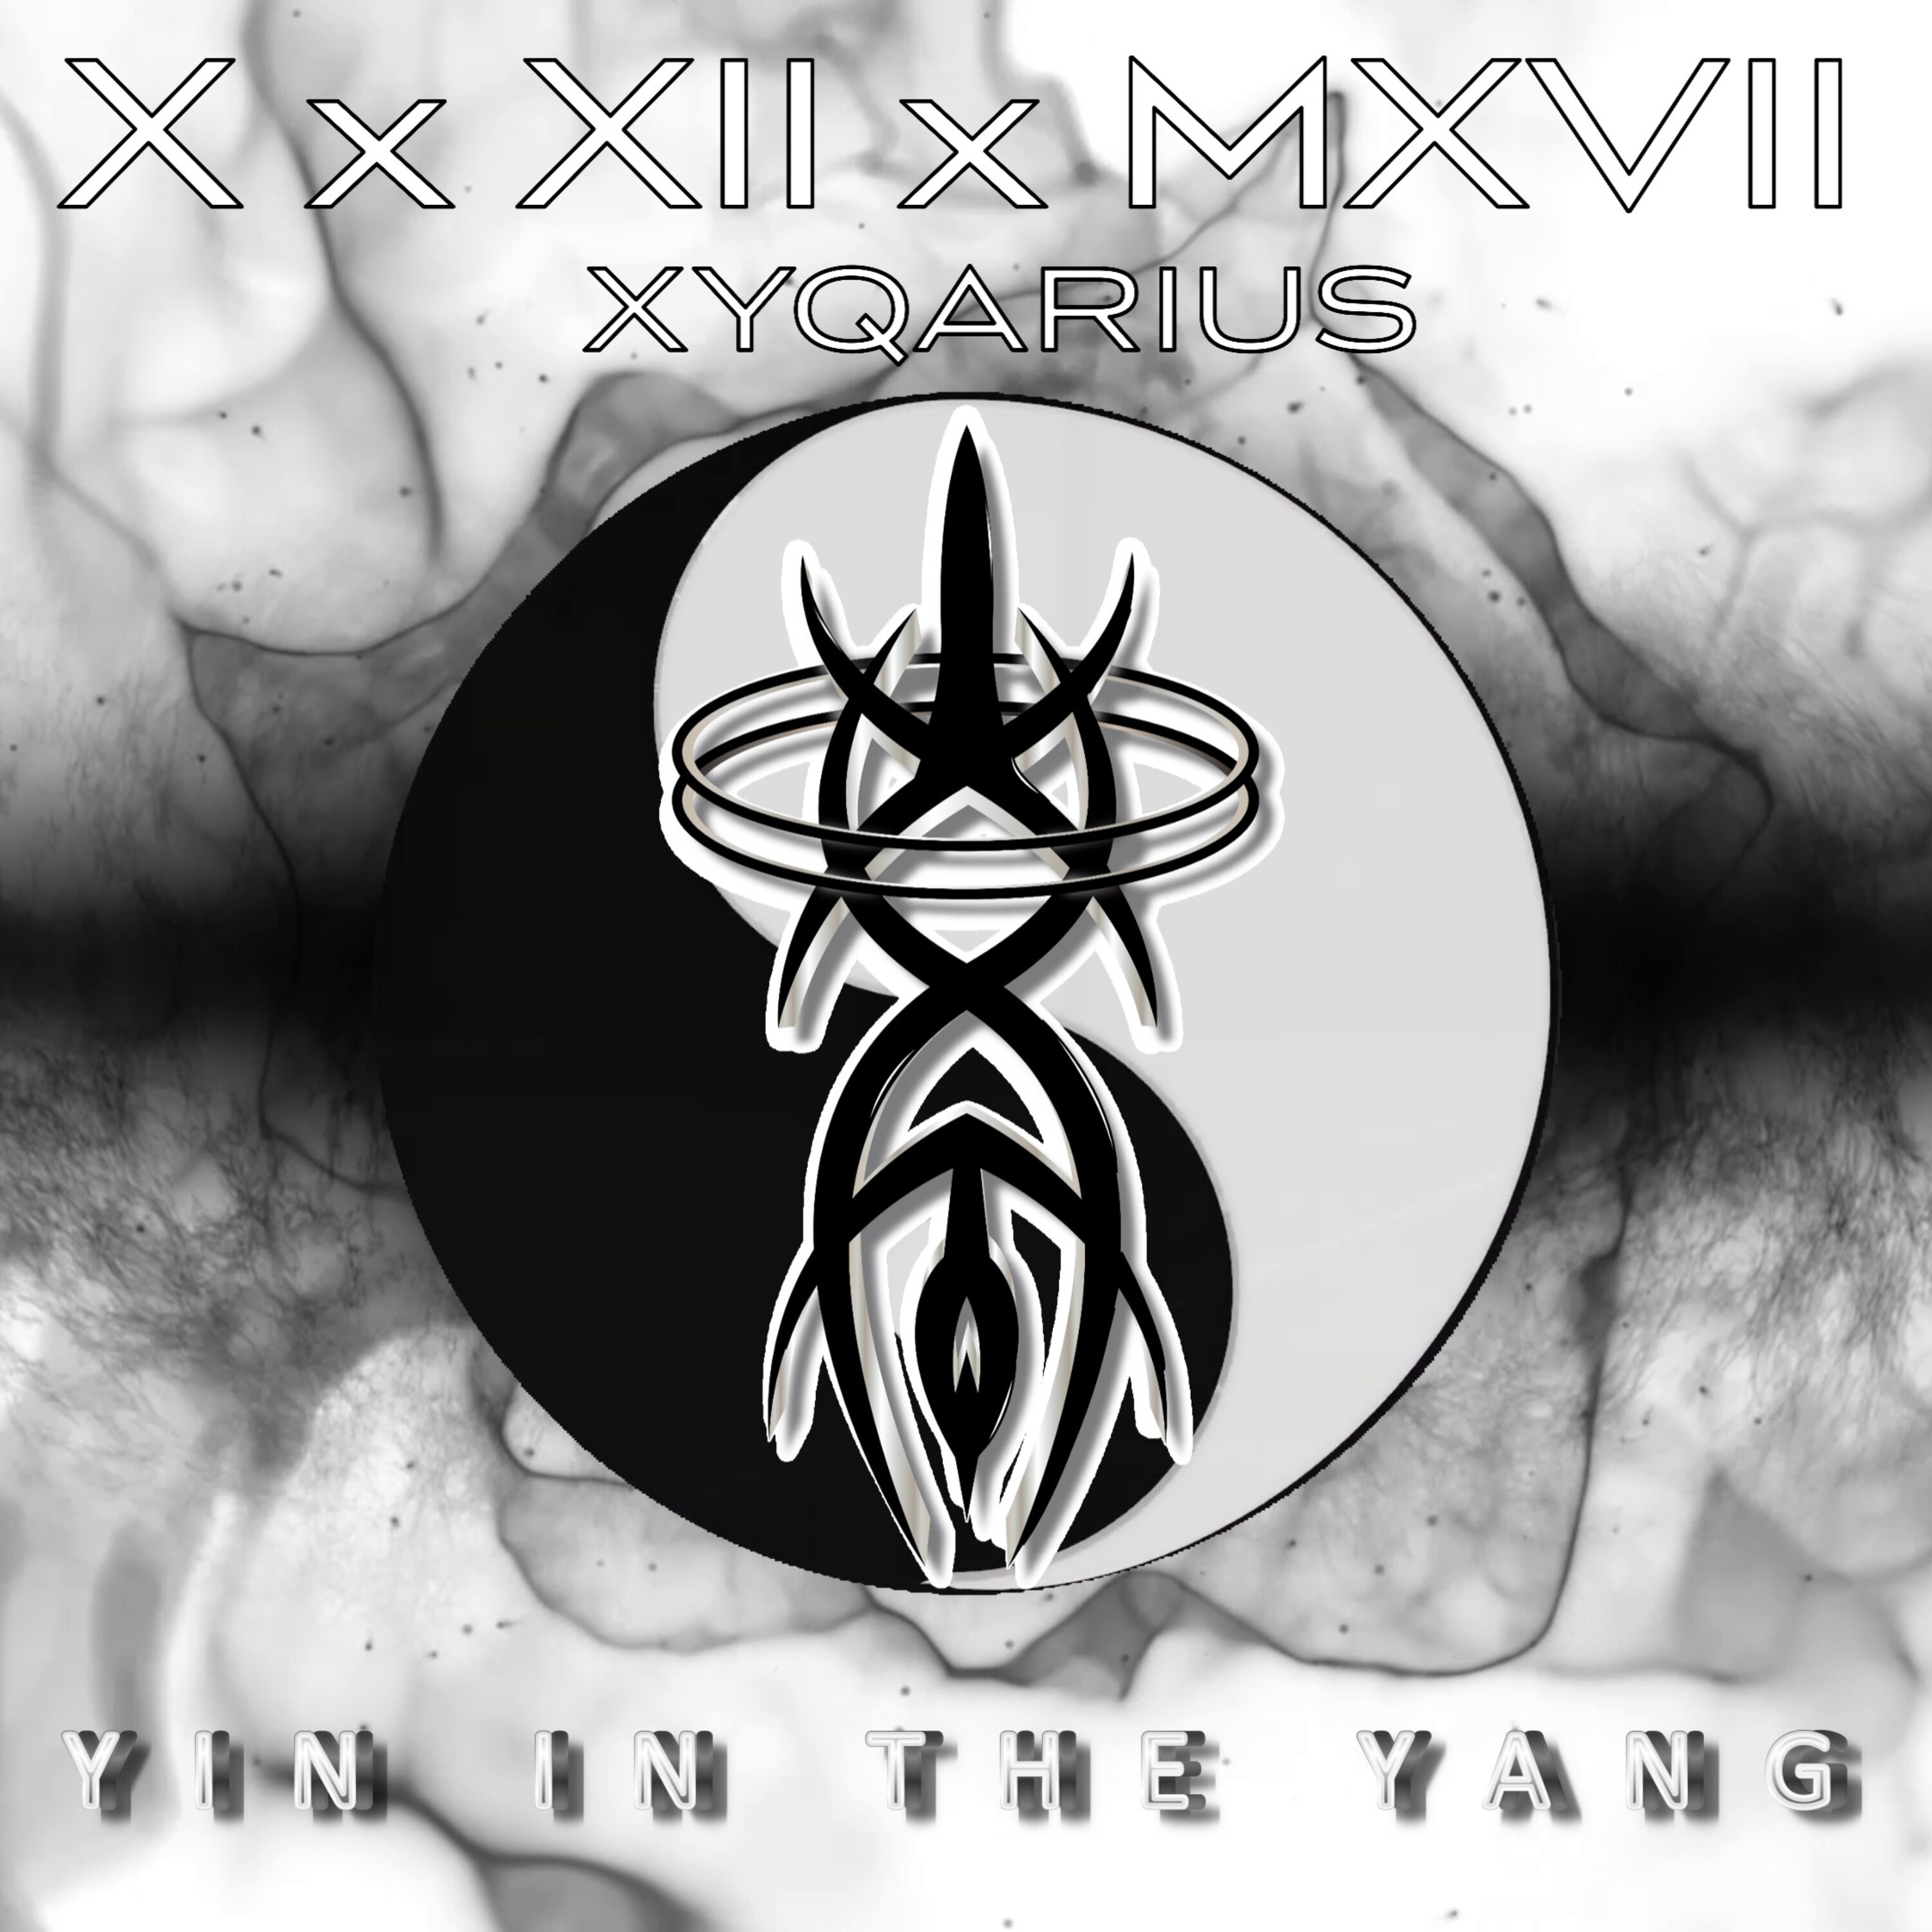 Artist and creative entrepreneur XYQARIUS makes his explosive entrance into the music world today with his debut single titled "Yin In The Yang".